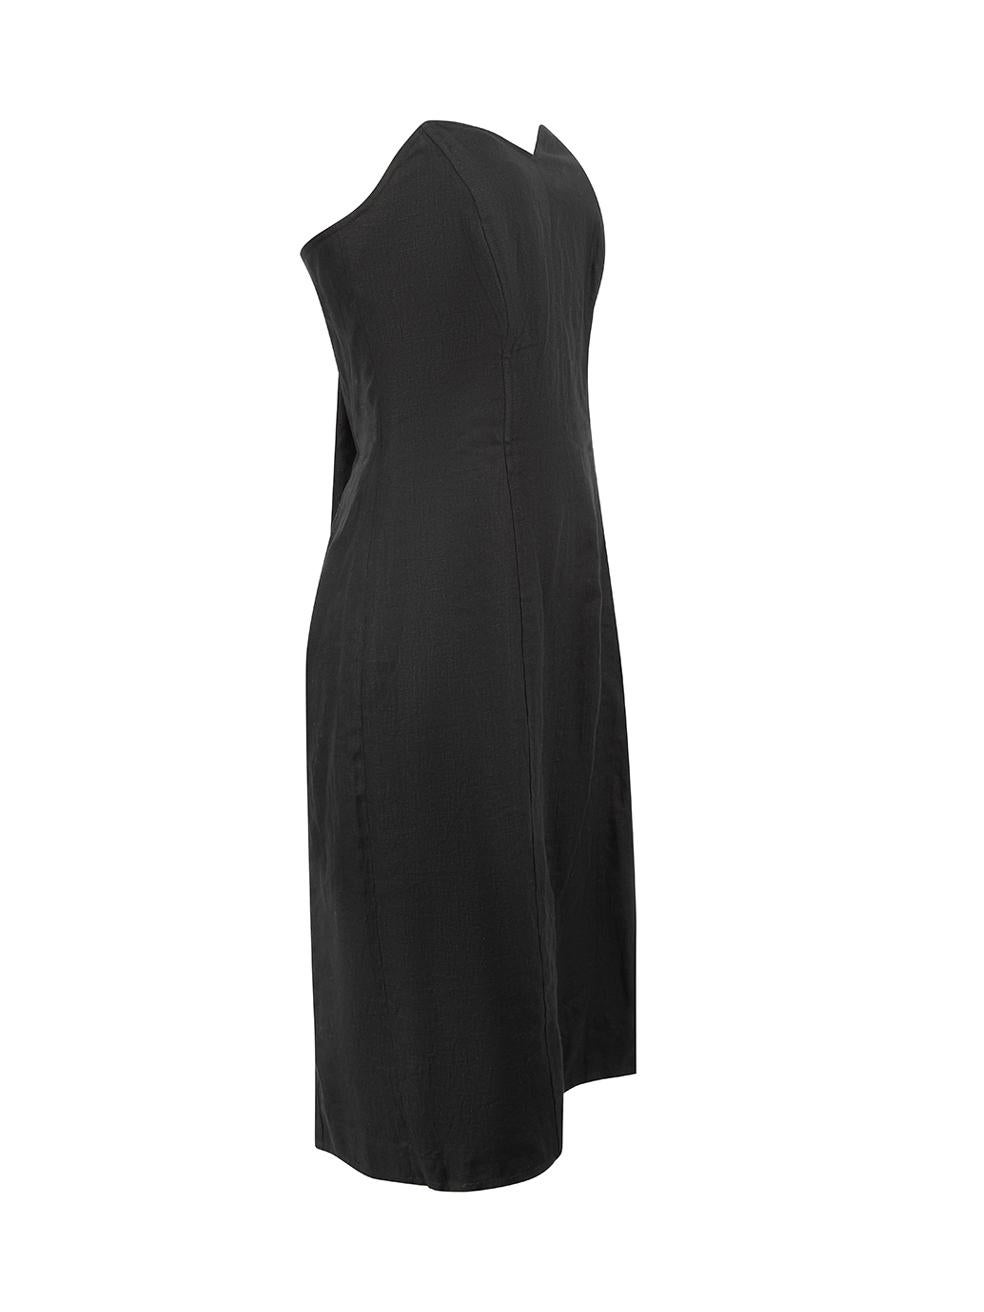 CONDITION is Very good. Hardly any visible wear to dress is evident on this used Max Mara Puro Lino designer resale item.

Details
Vintage
Black
Linen
Mini dress
Strapless
Sweetheart neckline
Boned bodice
Figure hugging fit
Side zip and hook